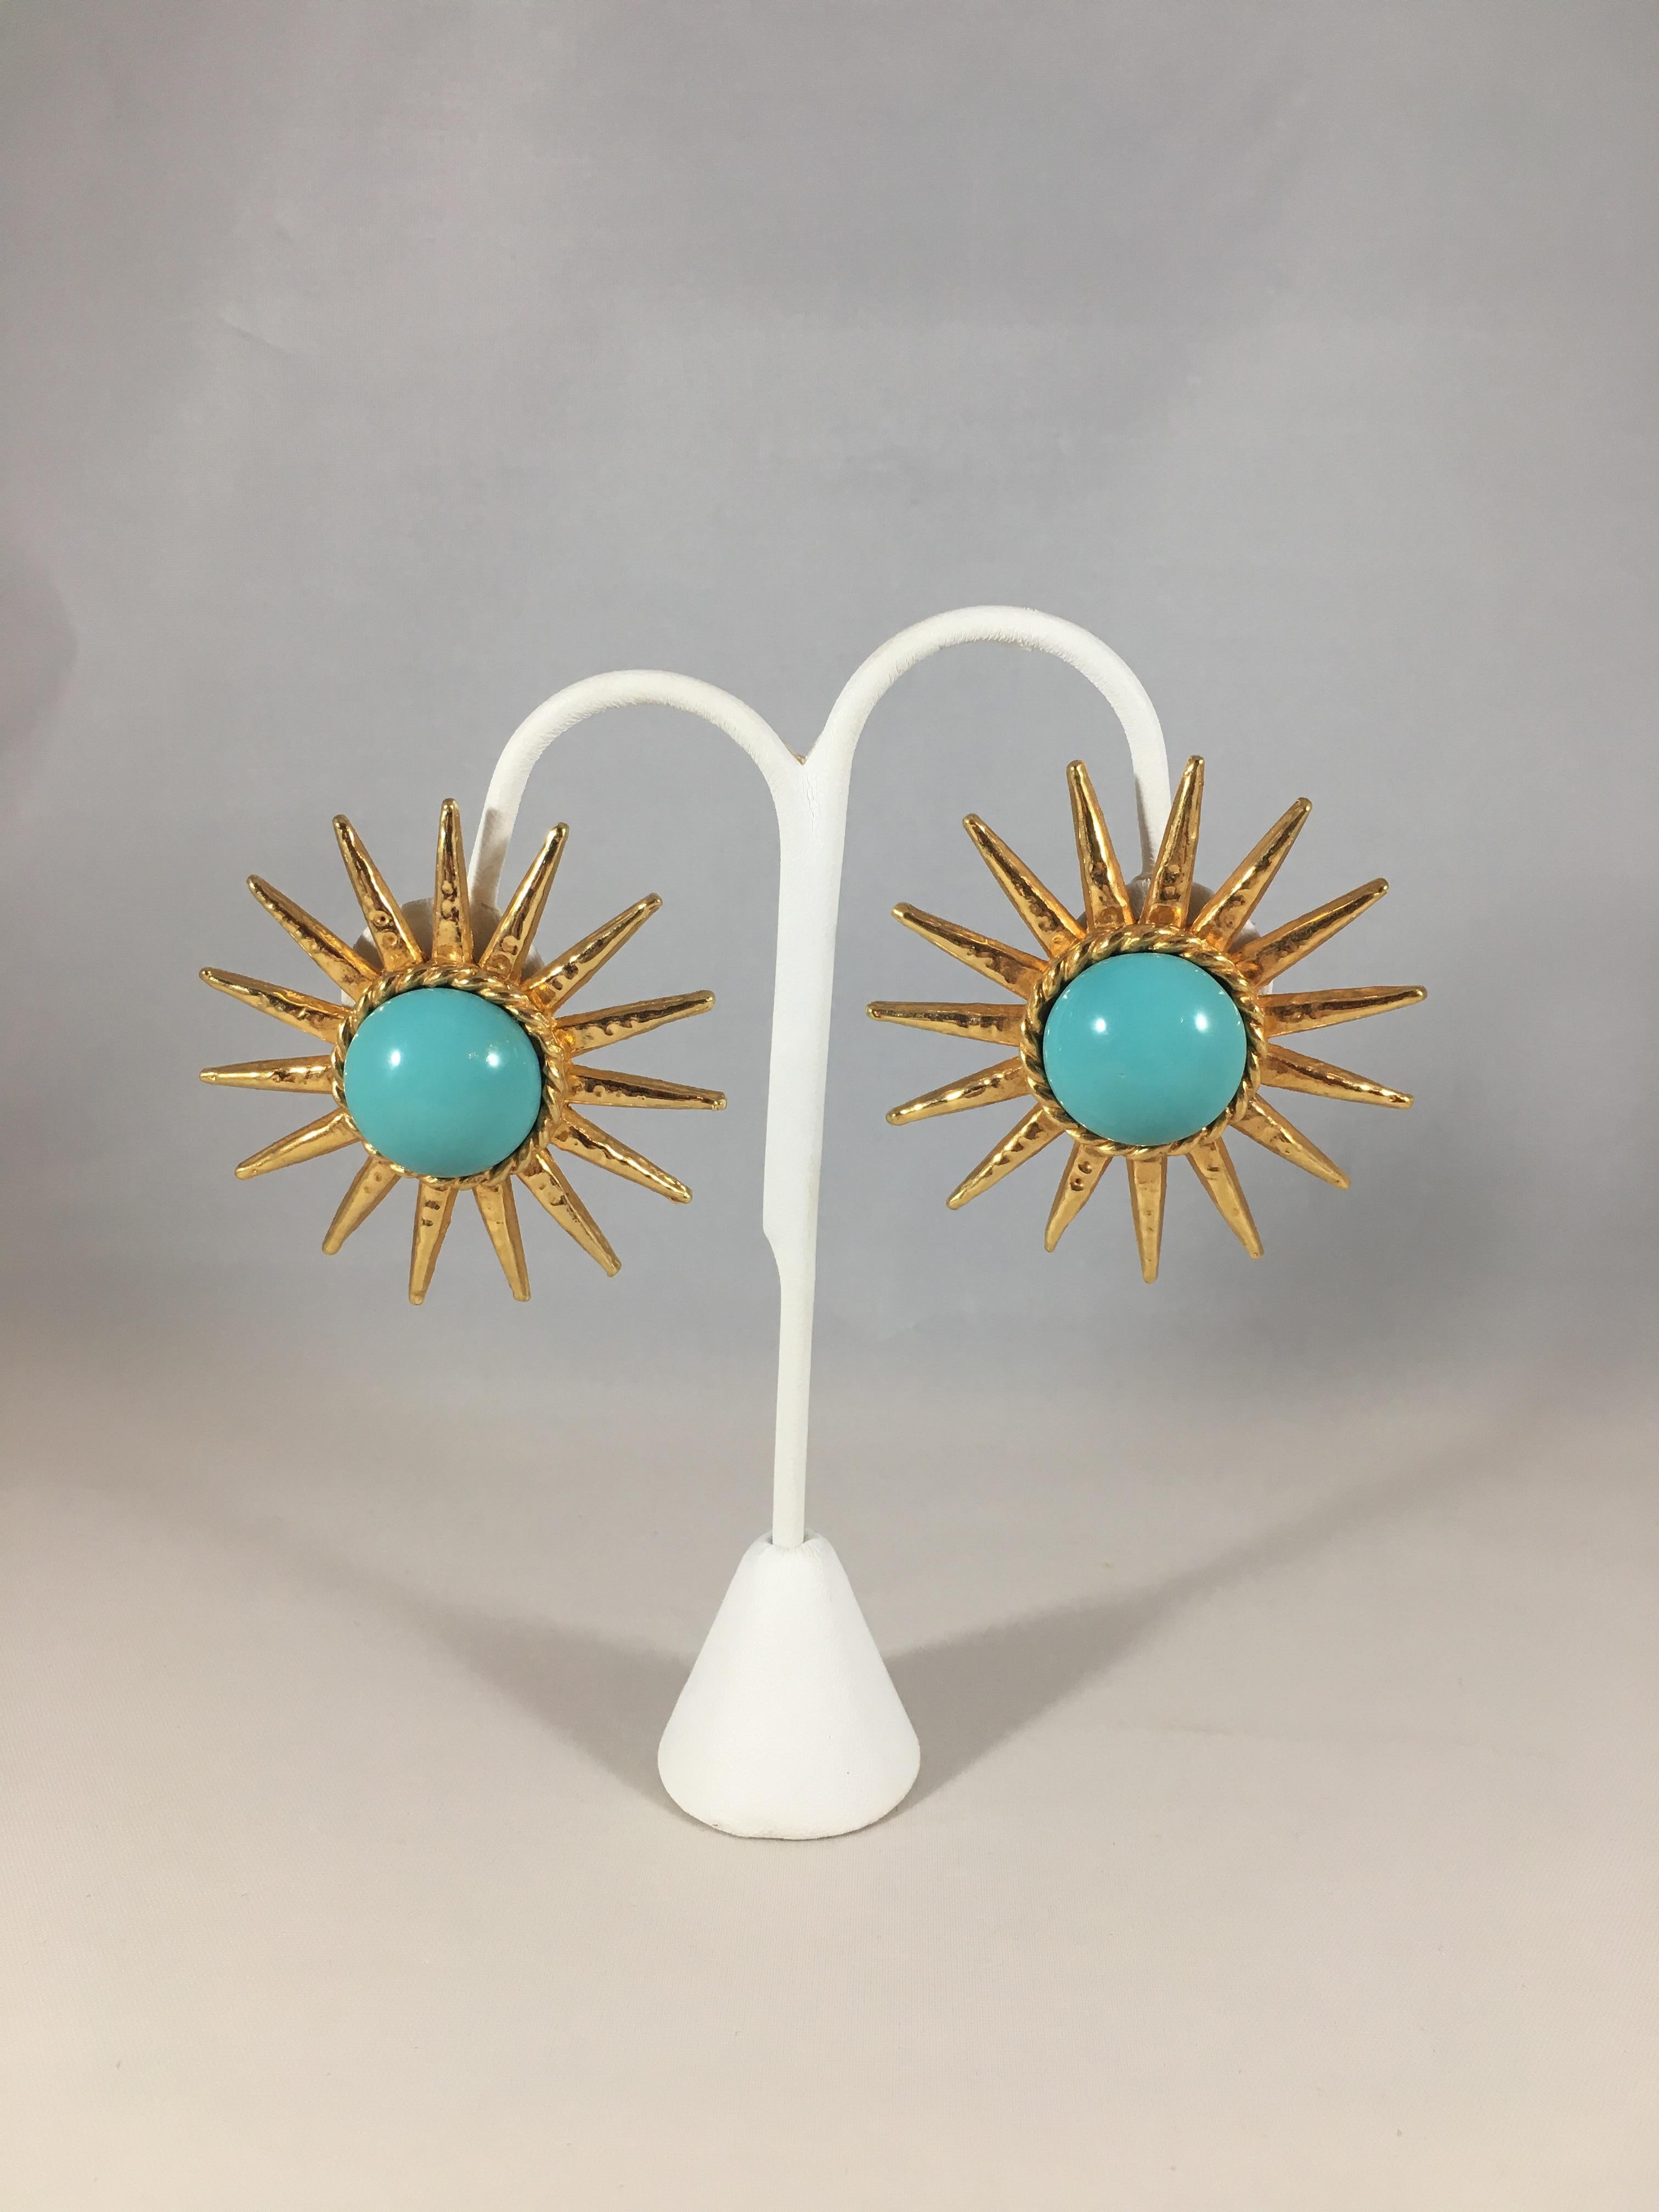 Phillipe Ferrandis Star Earrings with Turquoise Centers, 1990s In Excellent Condition For Sale In Chicago, IL